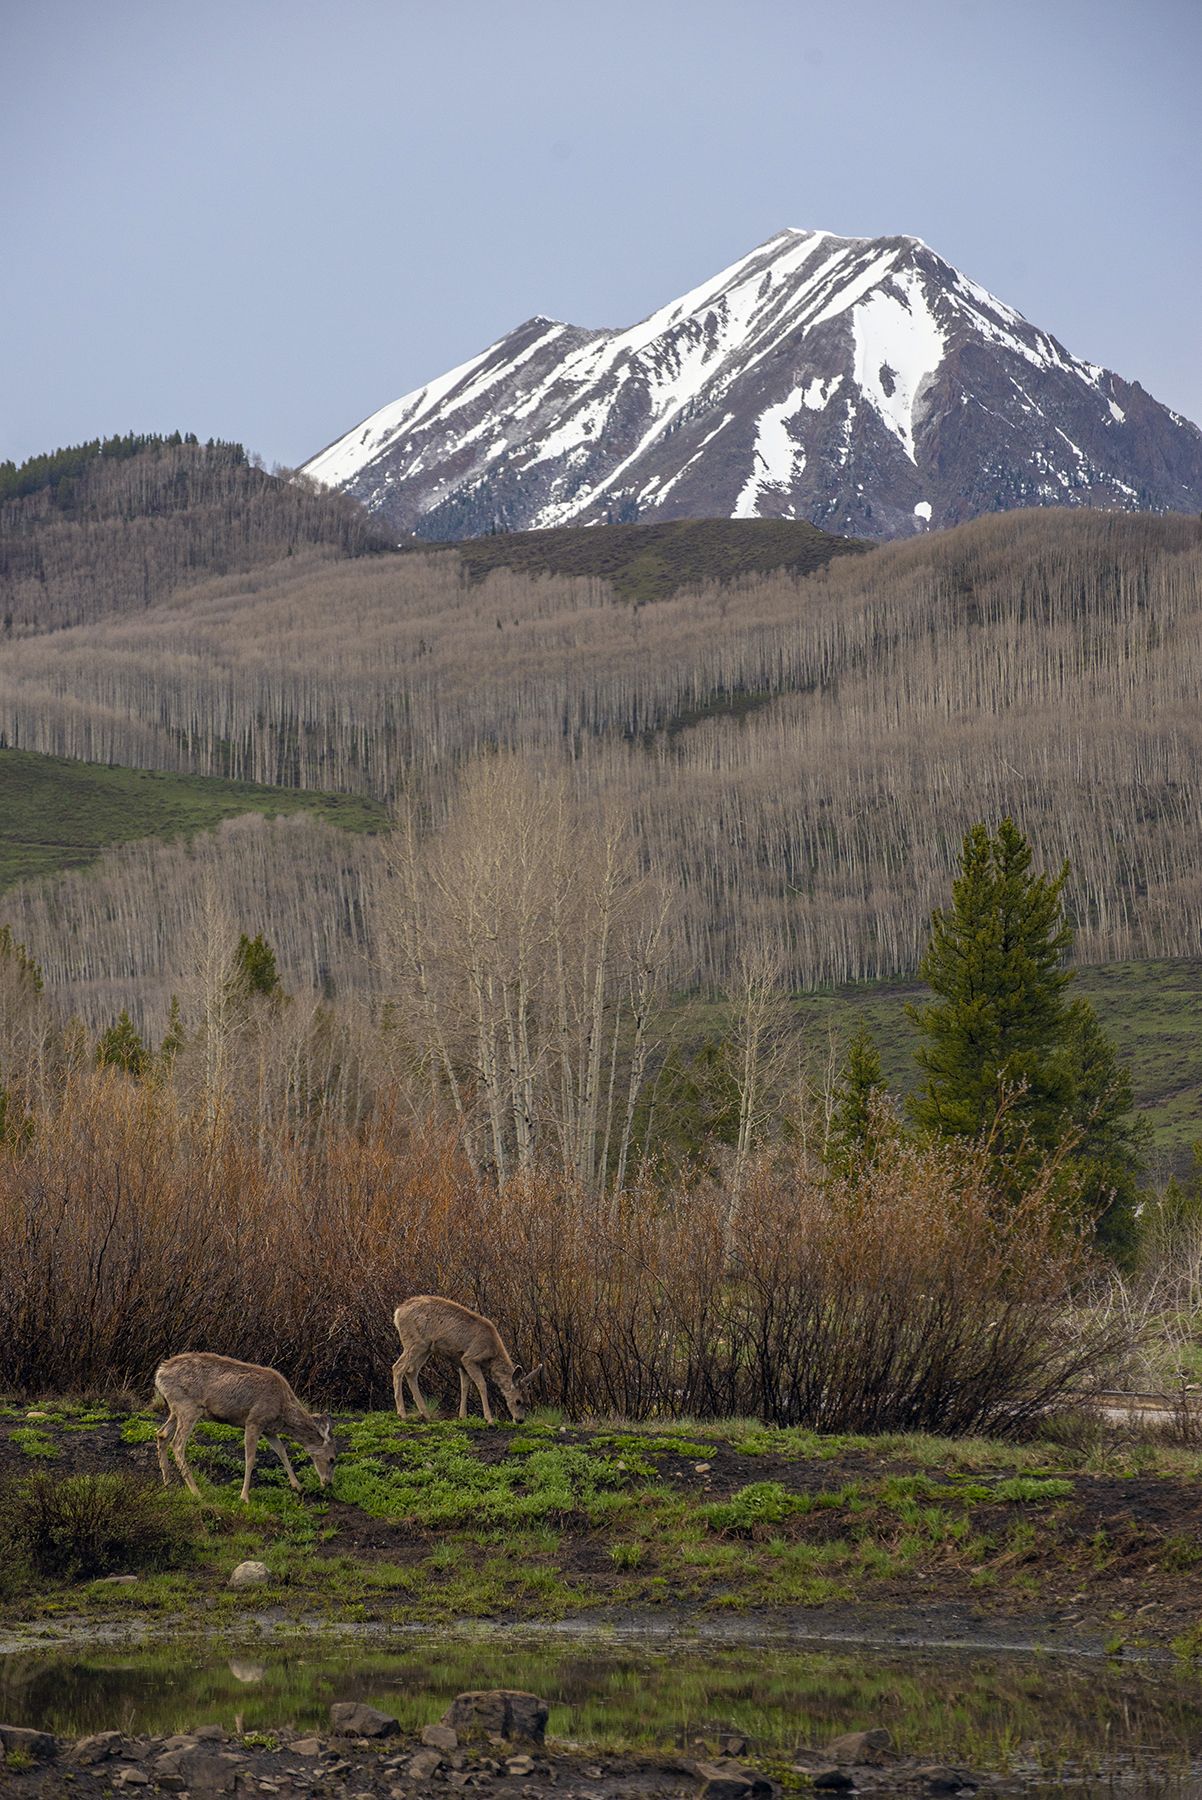 Two mule deer graze on emerald green grass with snow-capped Gothic Mountain in the background in Crested Butte, Colorado in spring.